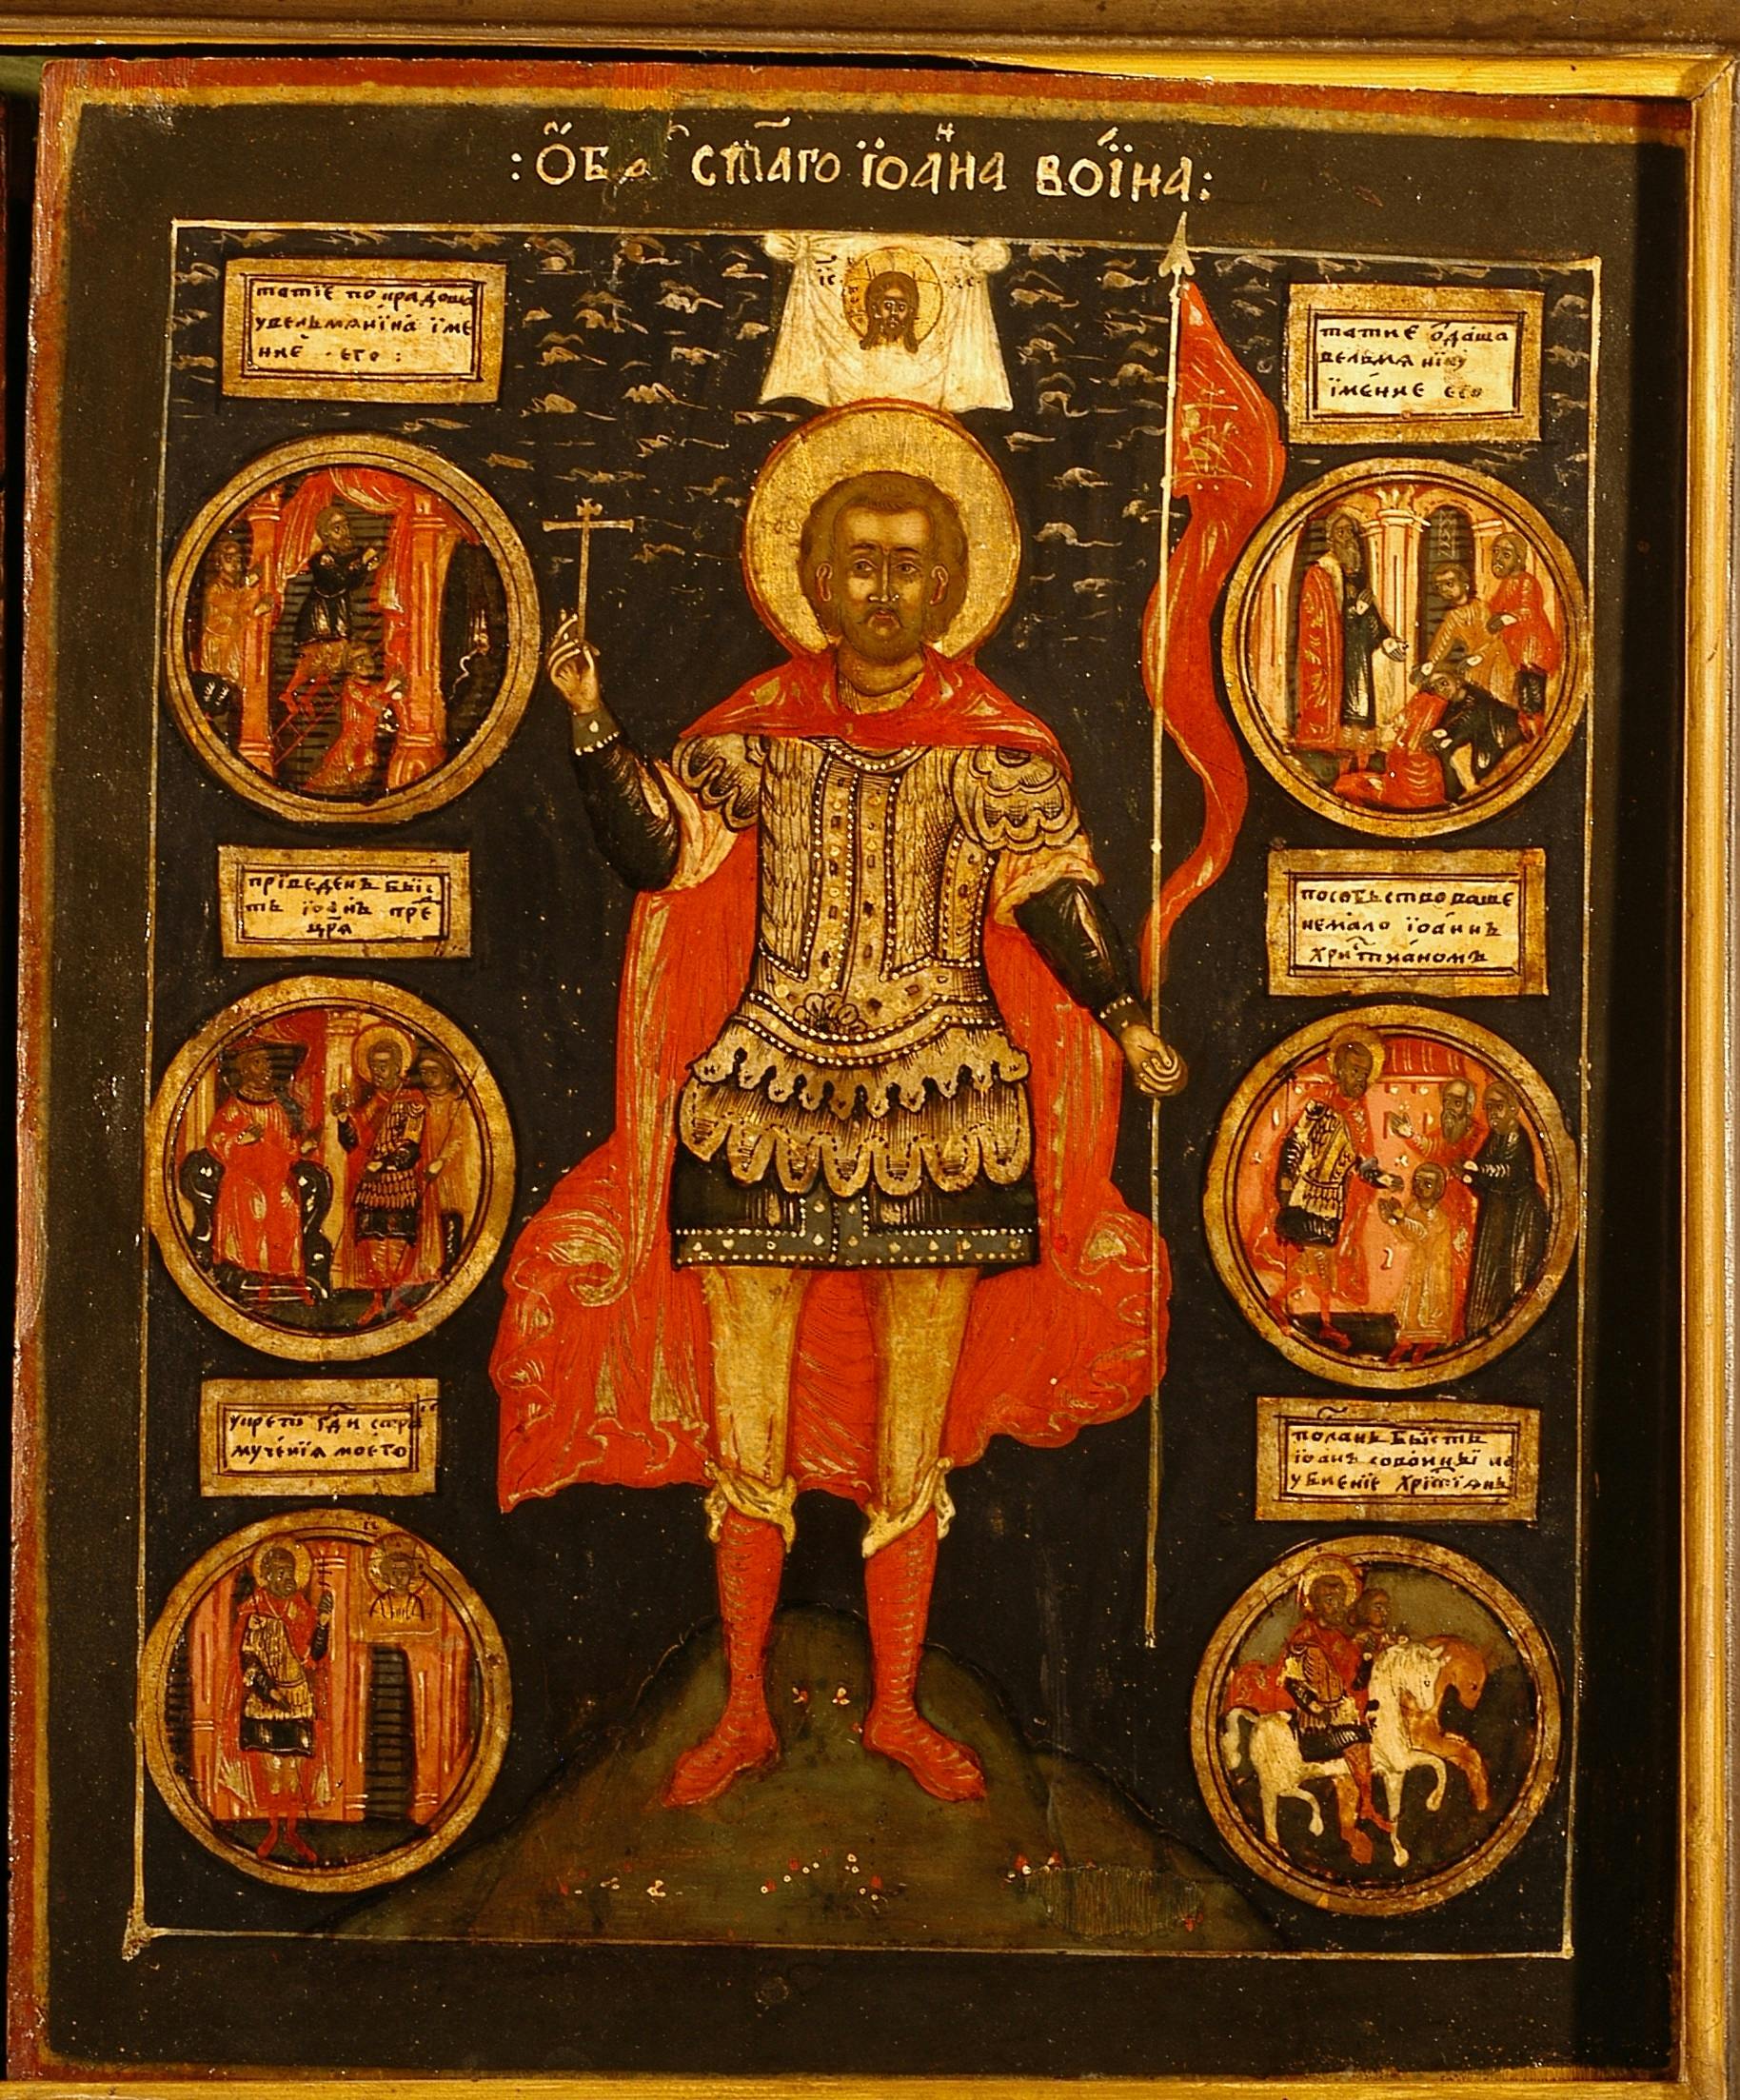 St. John the Warrior, Martyr, with scenes from the story of his life